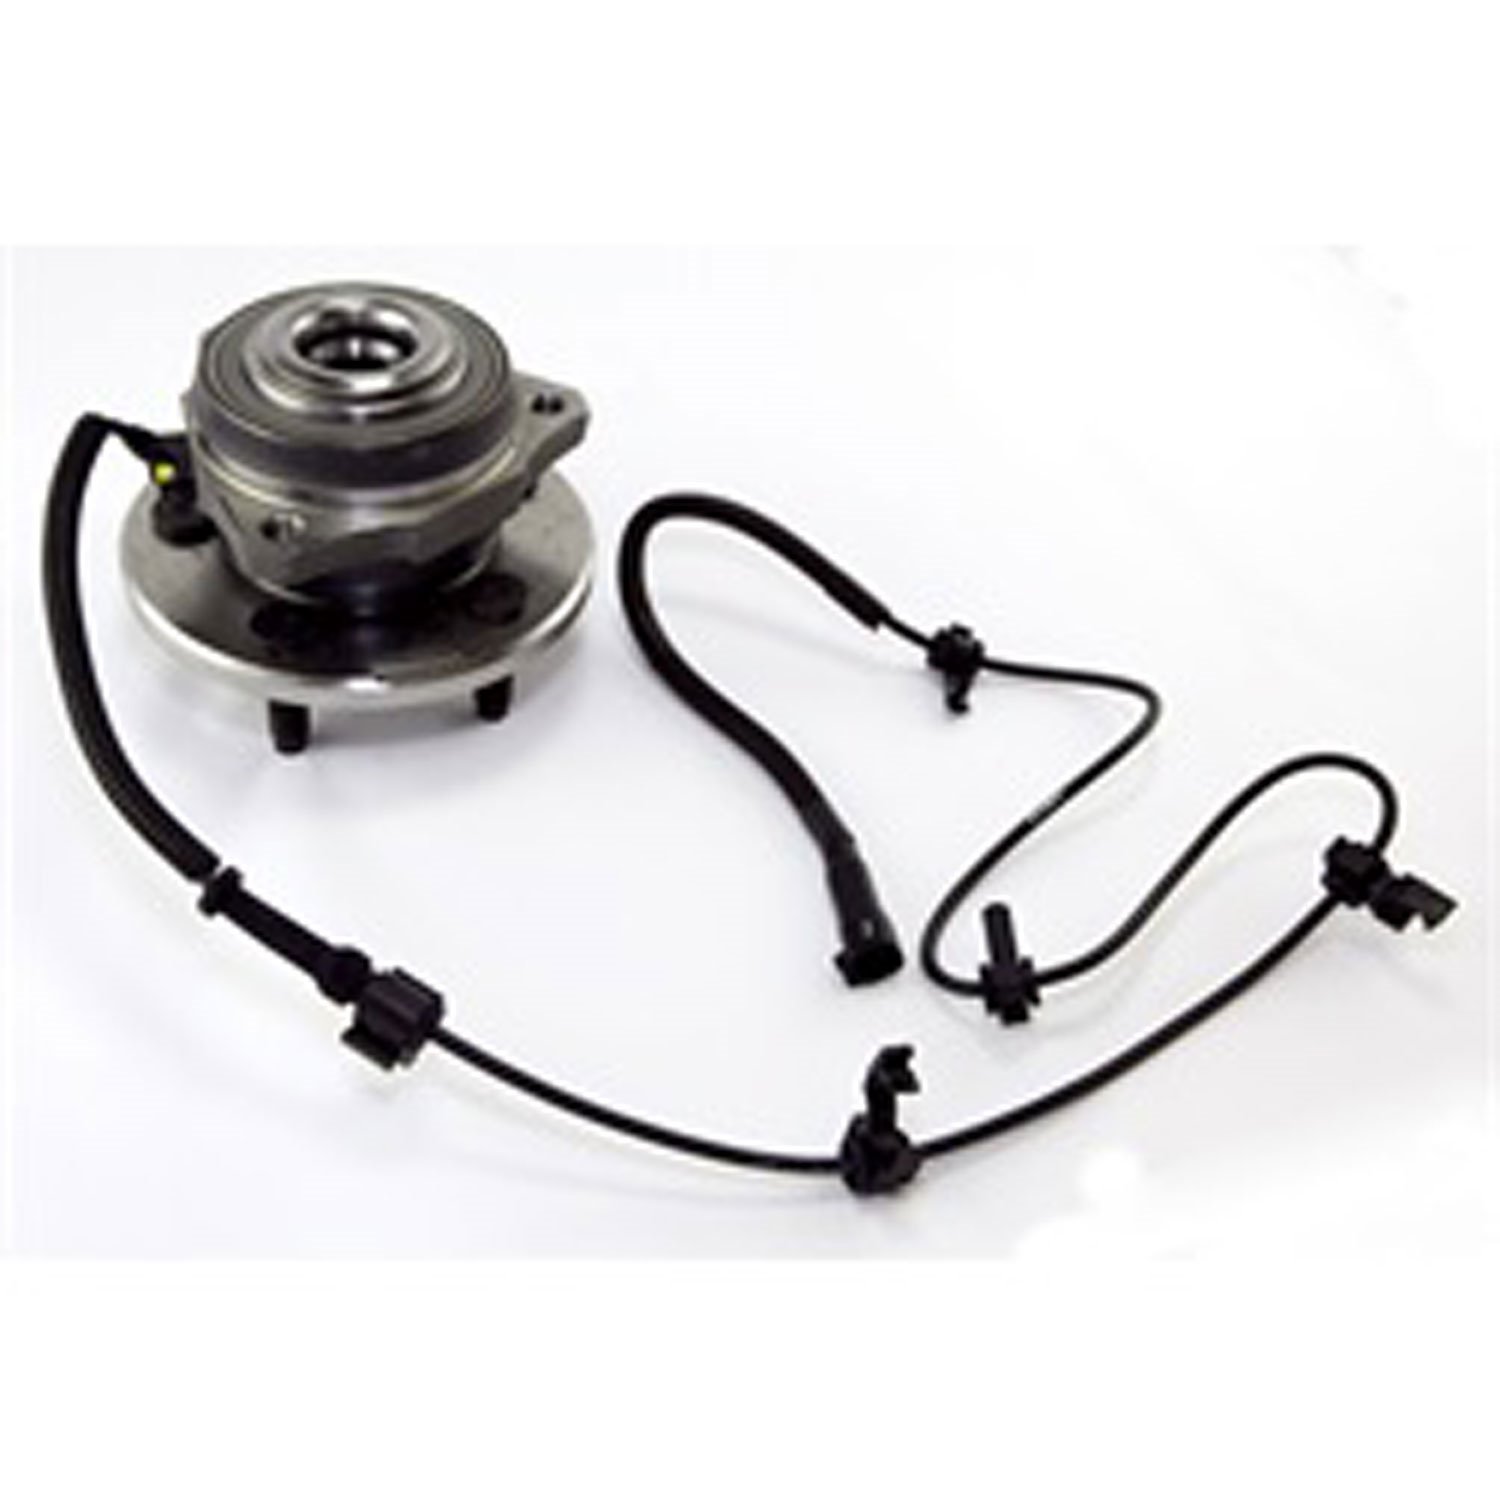 This front axle hub assembly from Omix-ADA fits 02-07 Jeep Liberty KJ with 4 wheel disc brakes and ABS left side only.